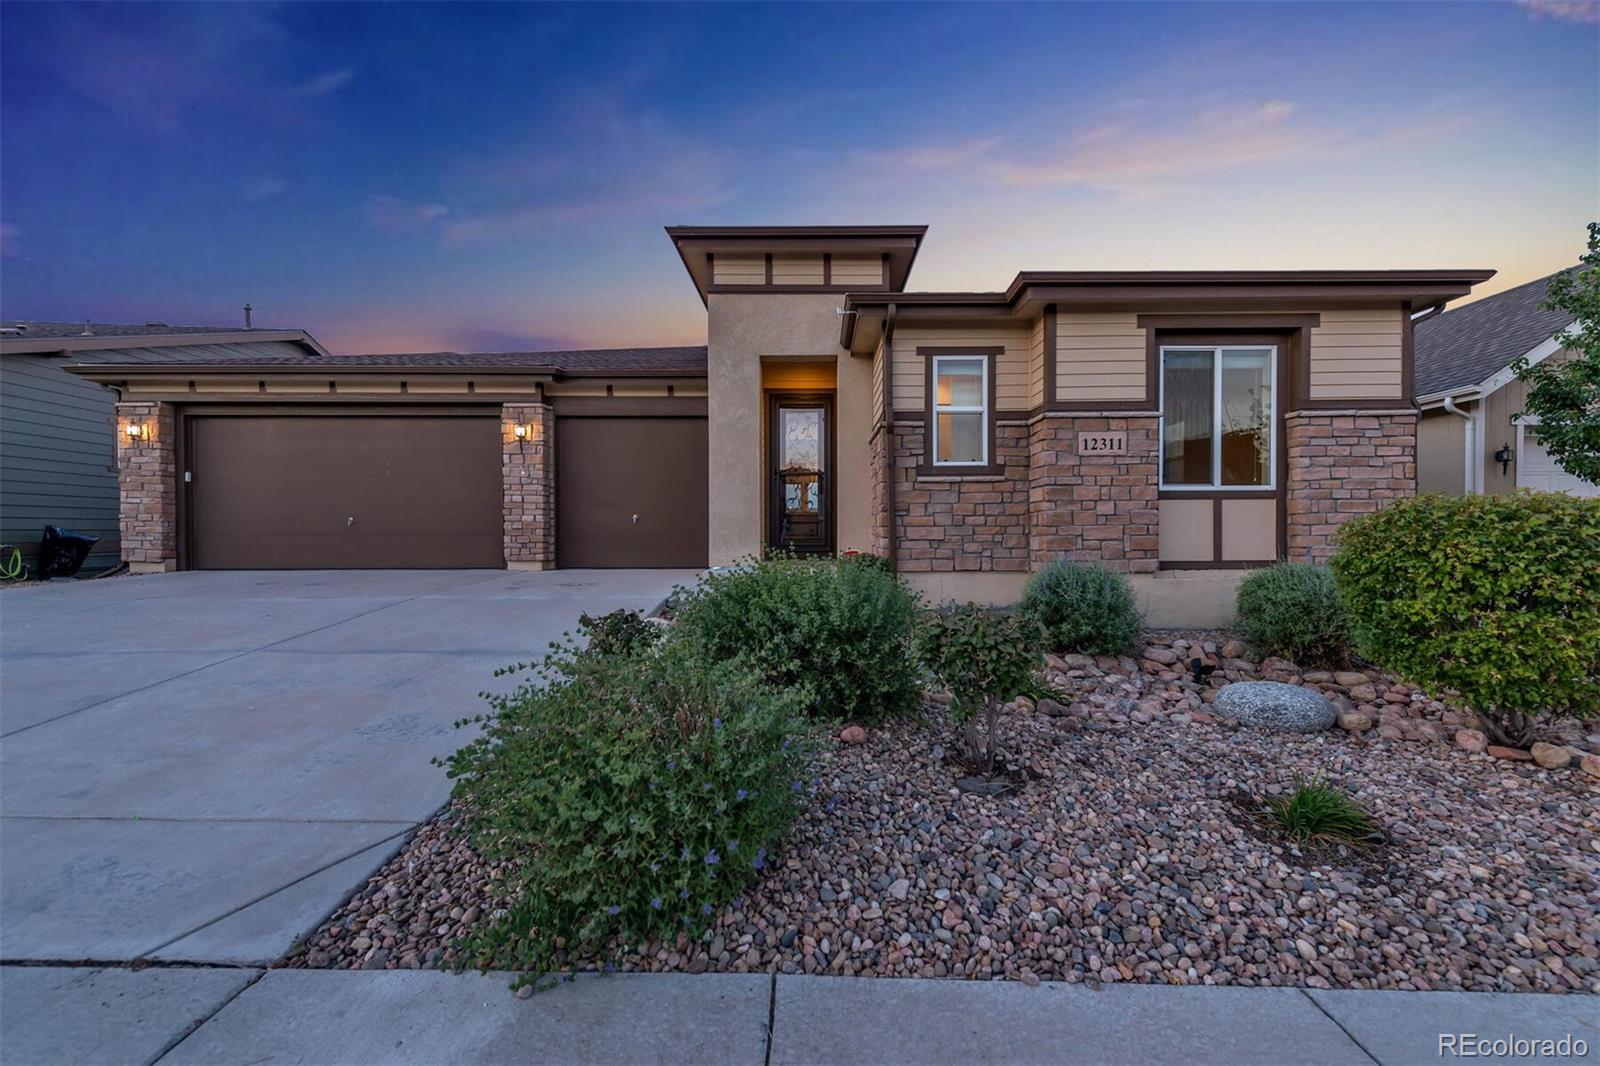 This fabulous Peak model in the coveted Skyestone 55+ neighborhod includes over 4700 sq.ft., 4 beds/4 baths/3 car garage and open space behind with beautiful views and a walking path!  